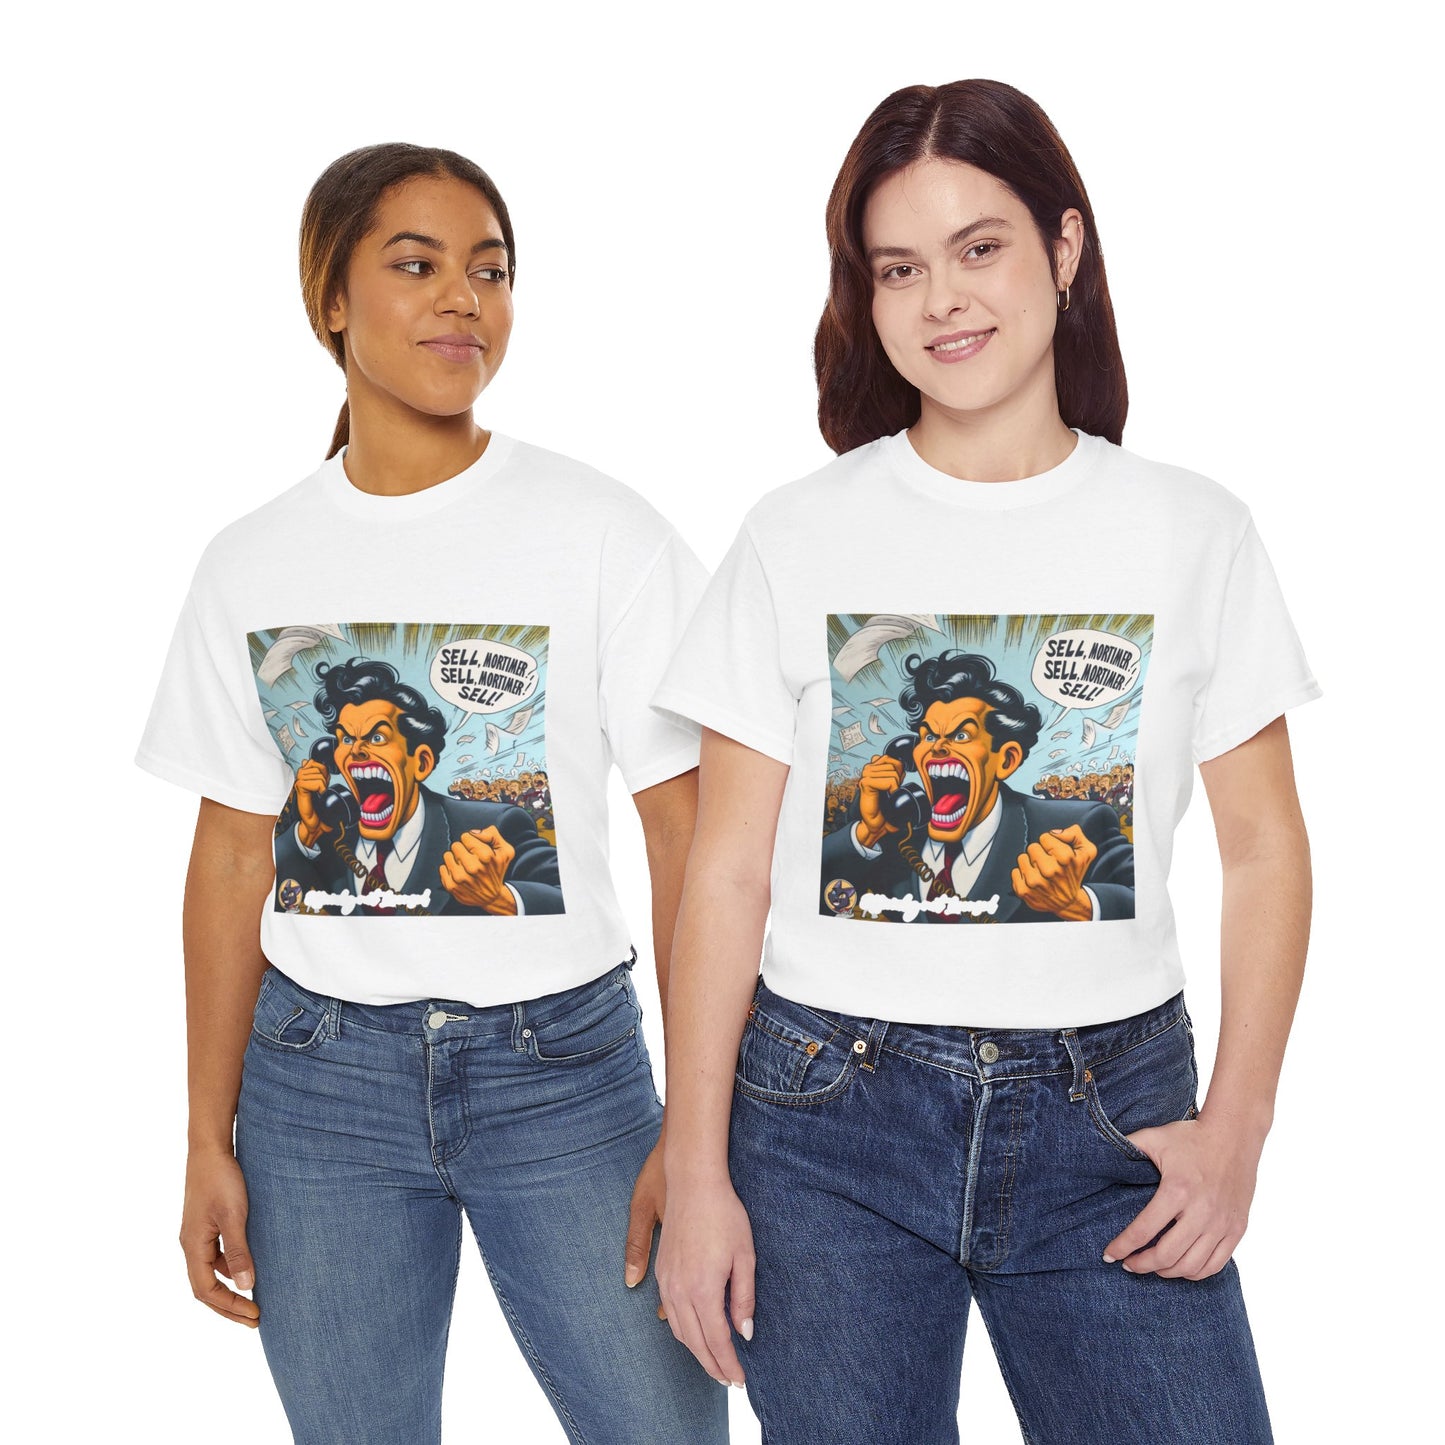 The Authentic Self T-Shirt: Sell, Mortimer! sell, Mortime! sell!